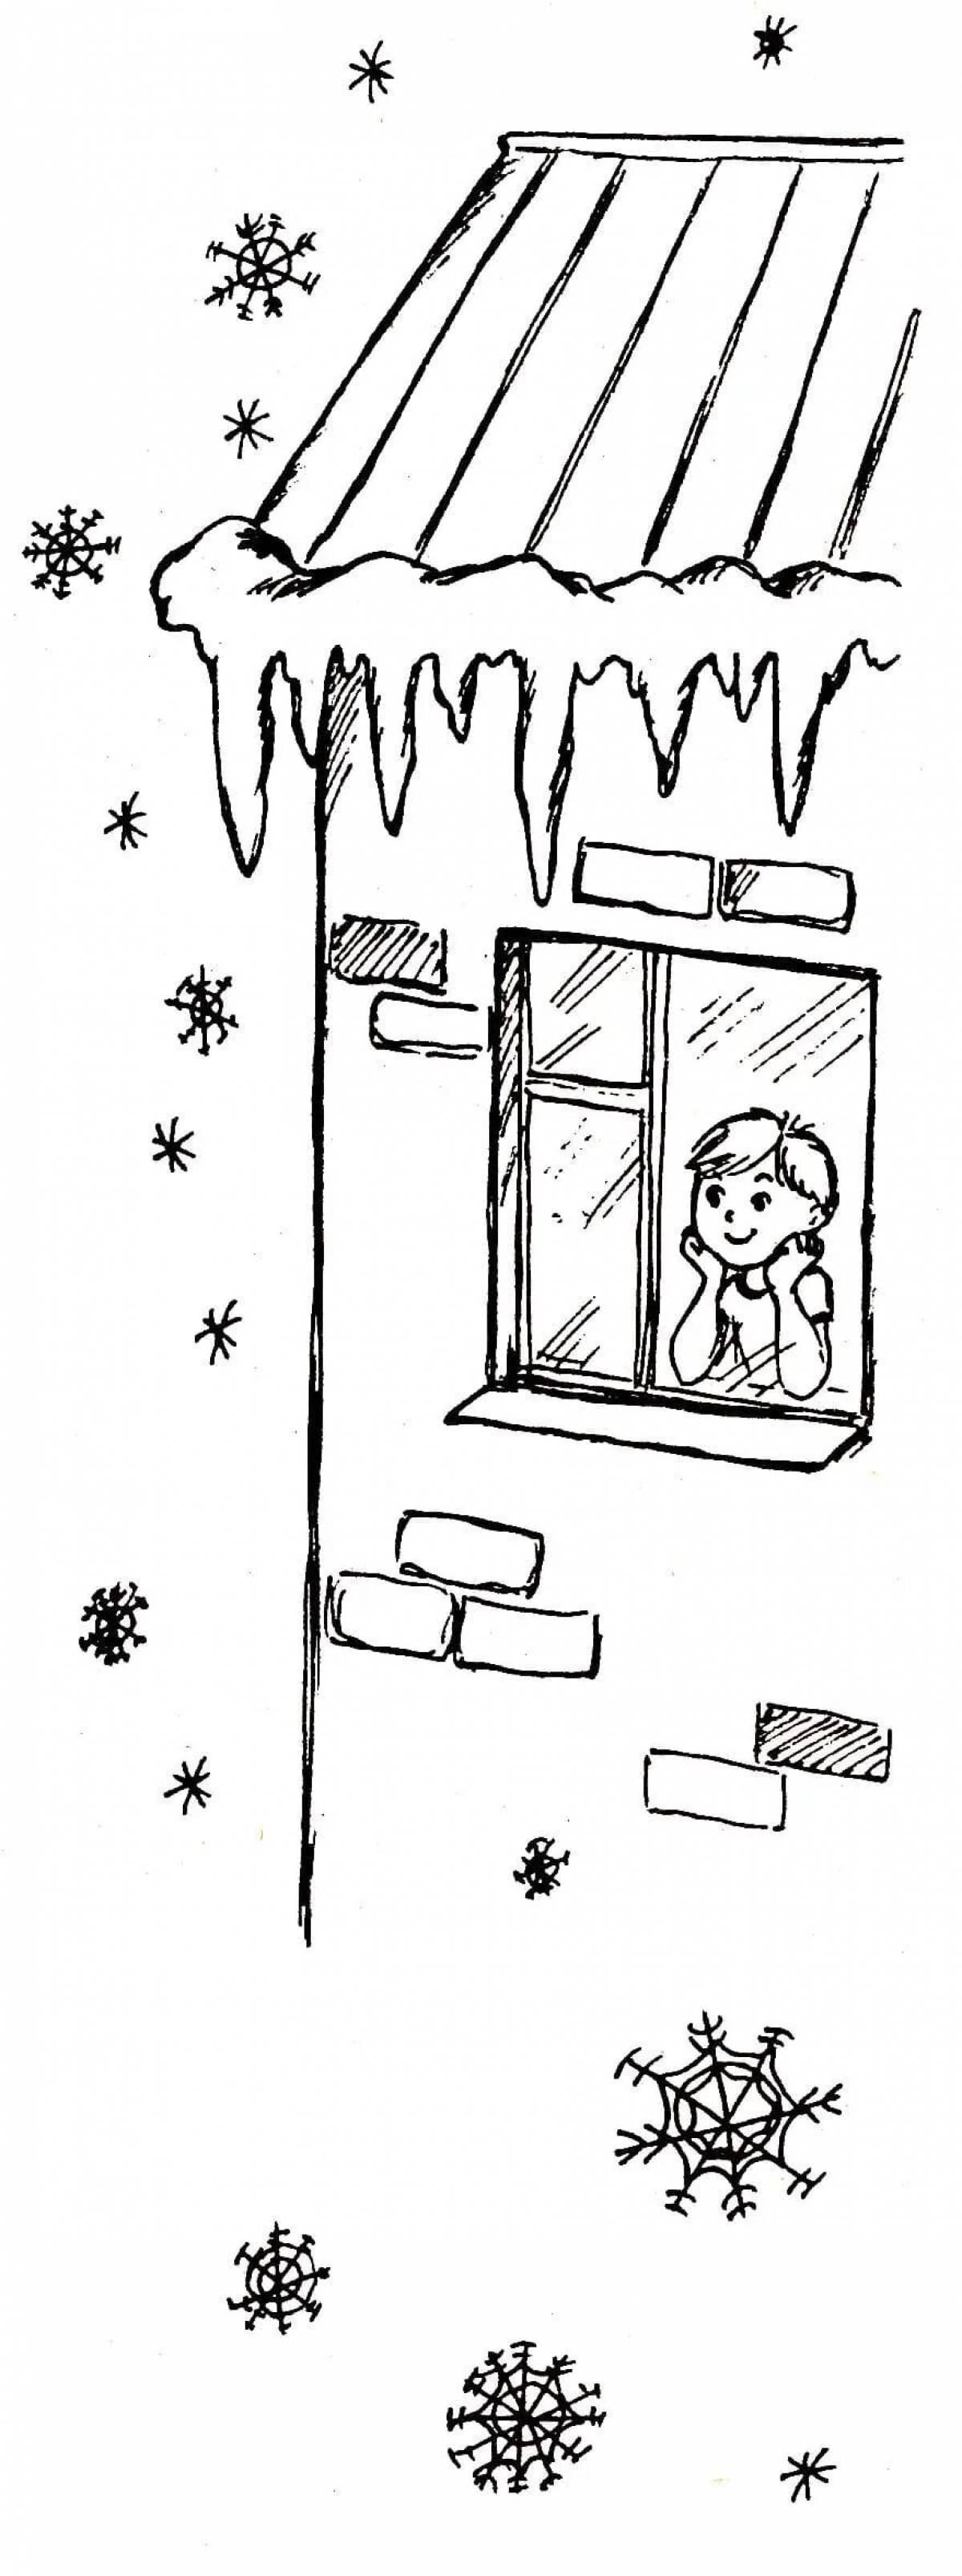 Careful icicles for kids #9